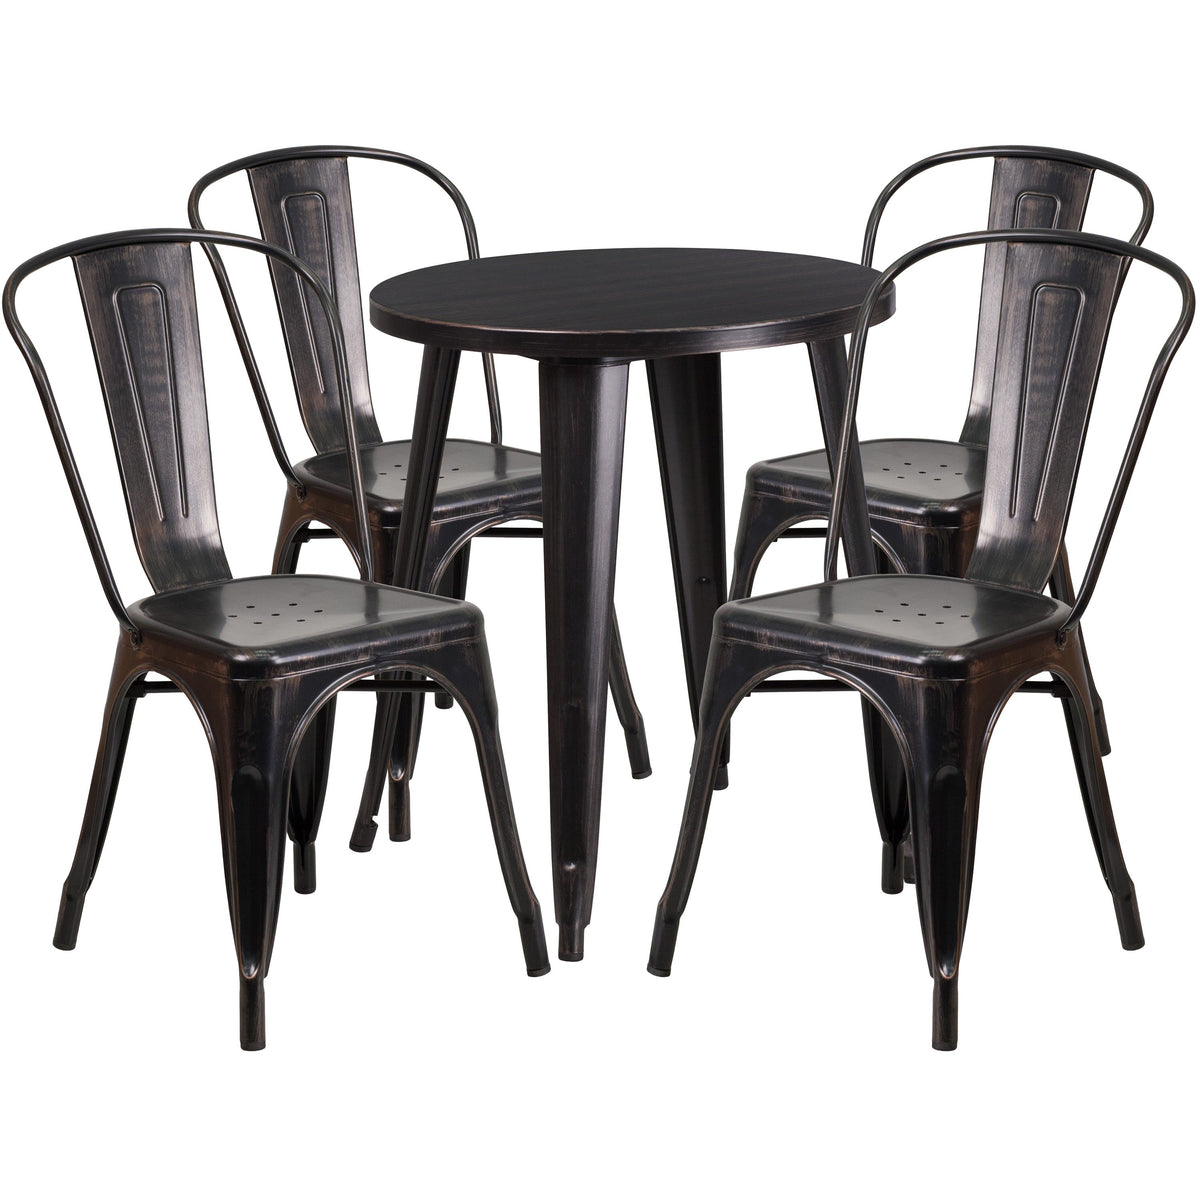 Black-Antique Gold |#| 24inch Round Black-Antique Gold Metal Indoor-Outdoor Table Set with 4 Cafe Chairs